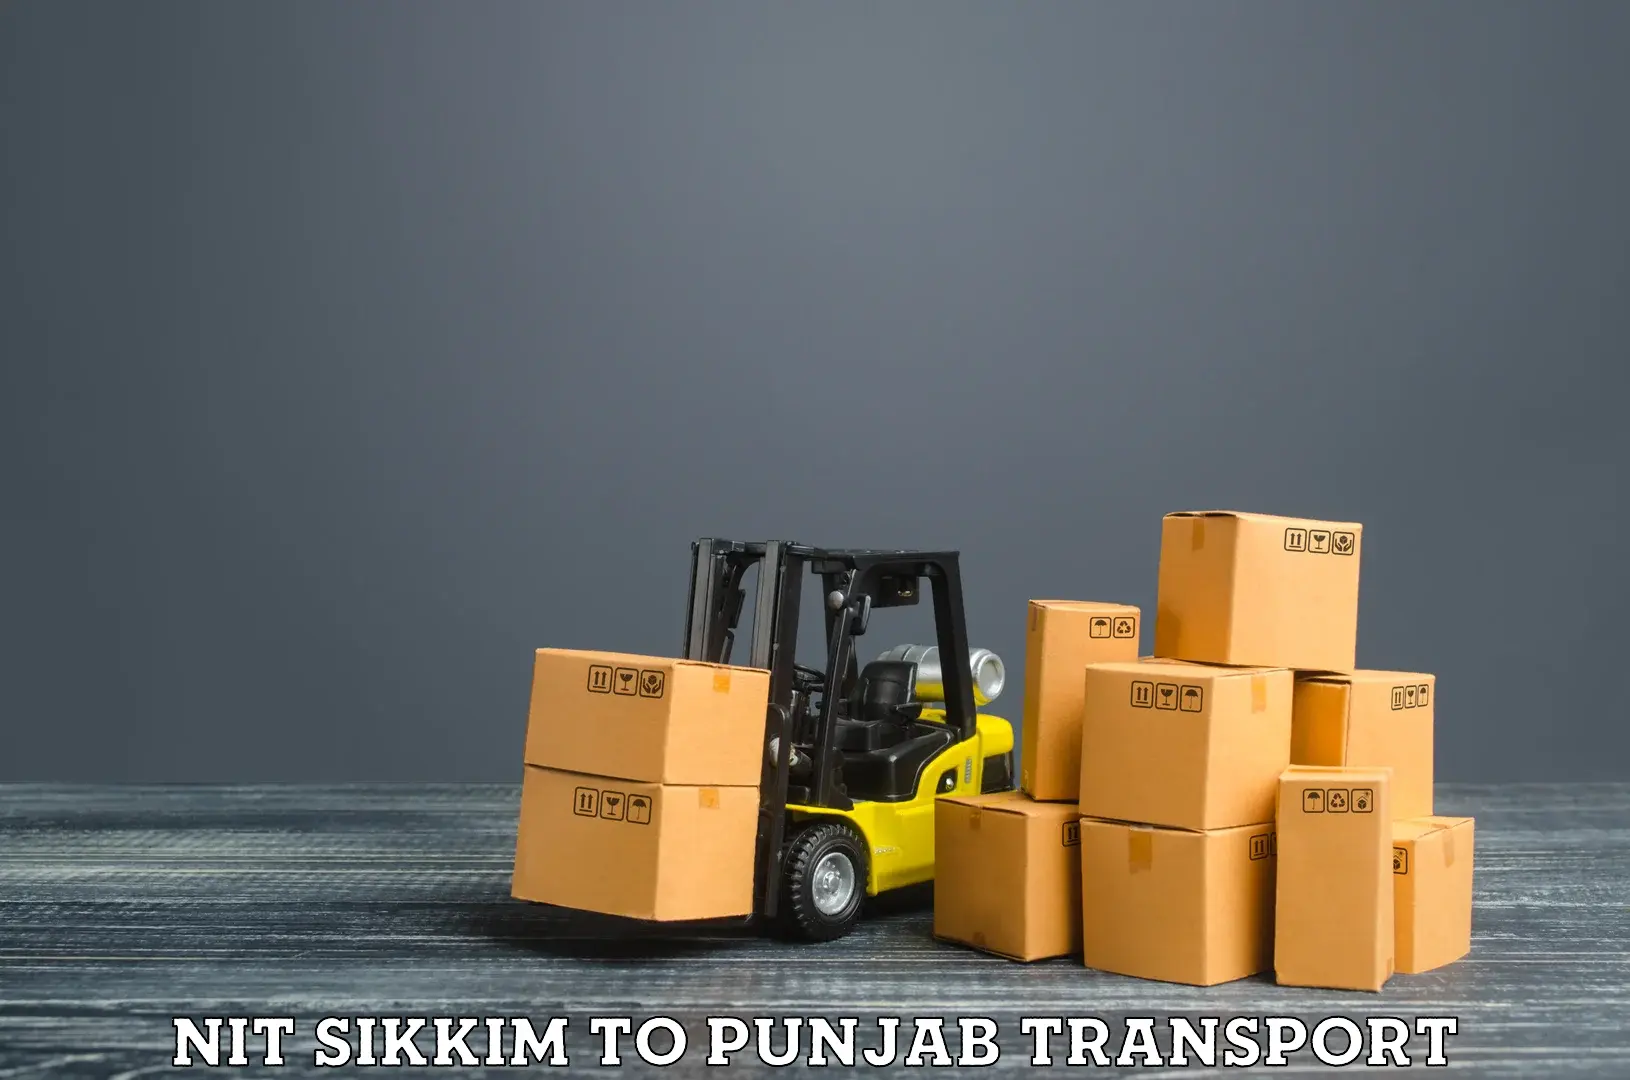 Container transport service NIT Sikkim to Punjab